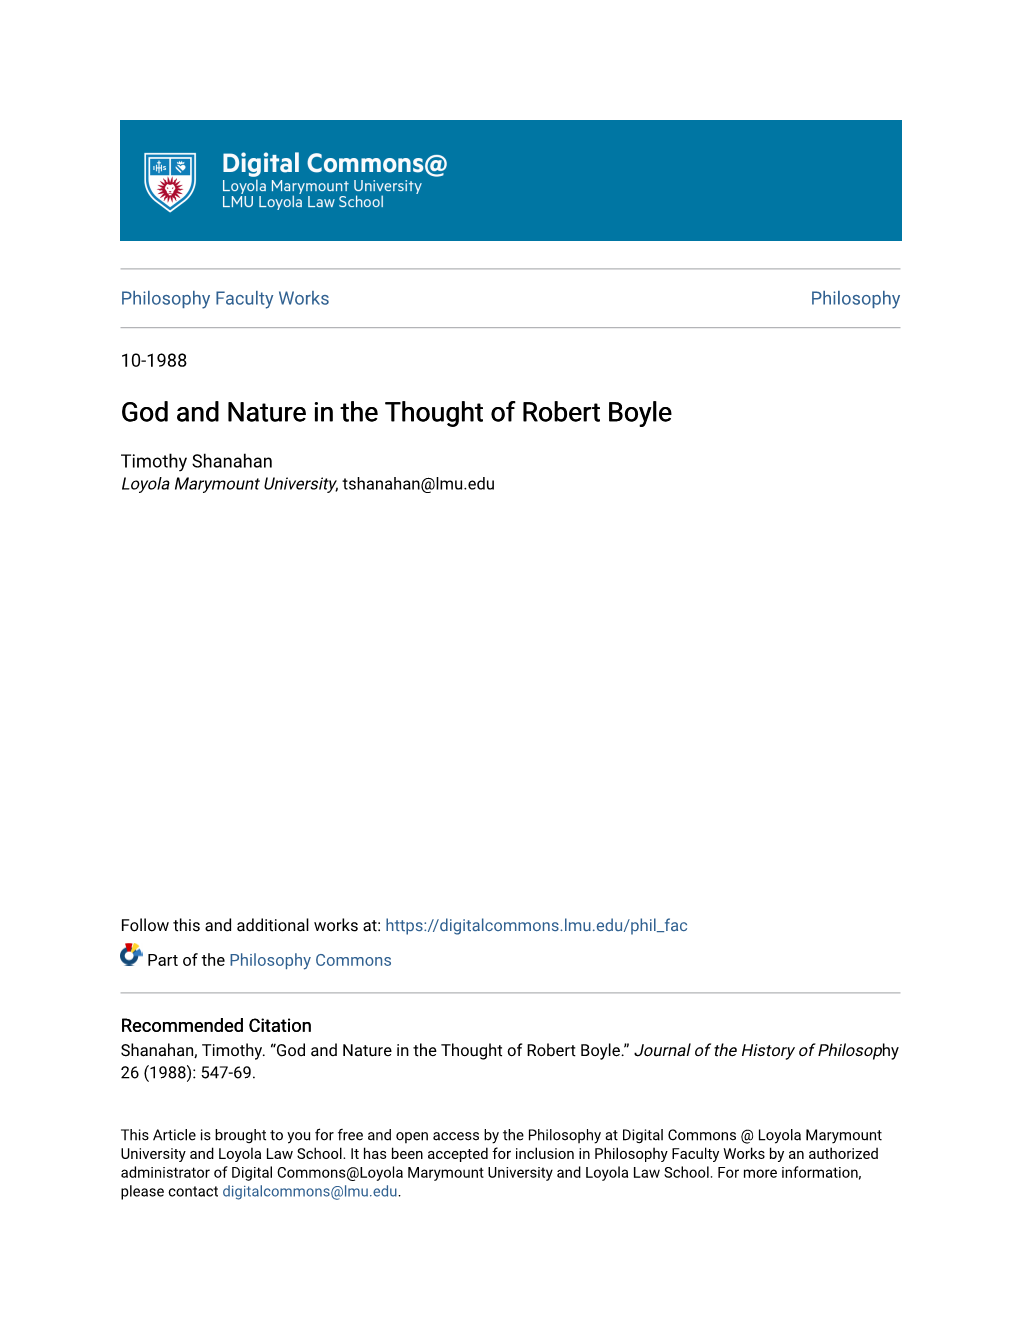 God and Nature in the Thought of Robert Boyle